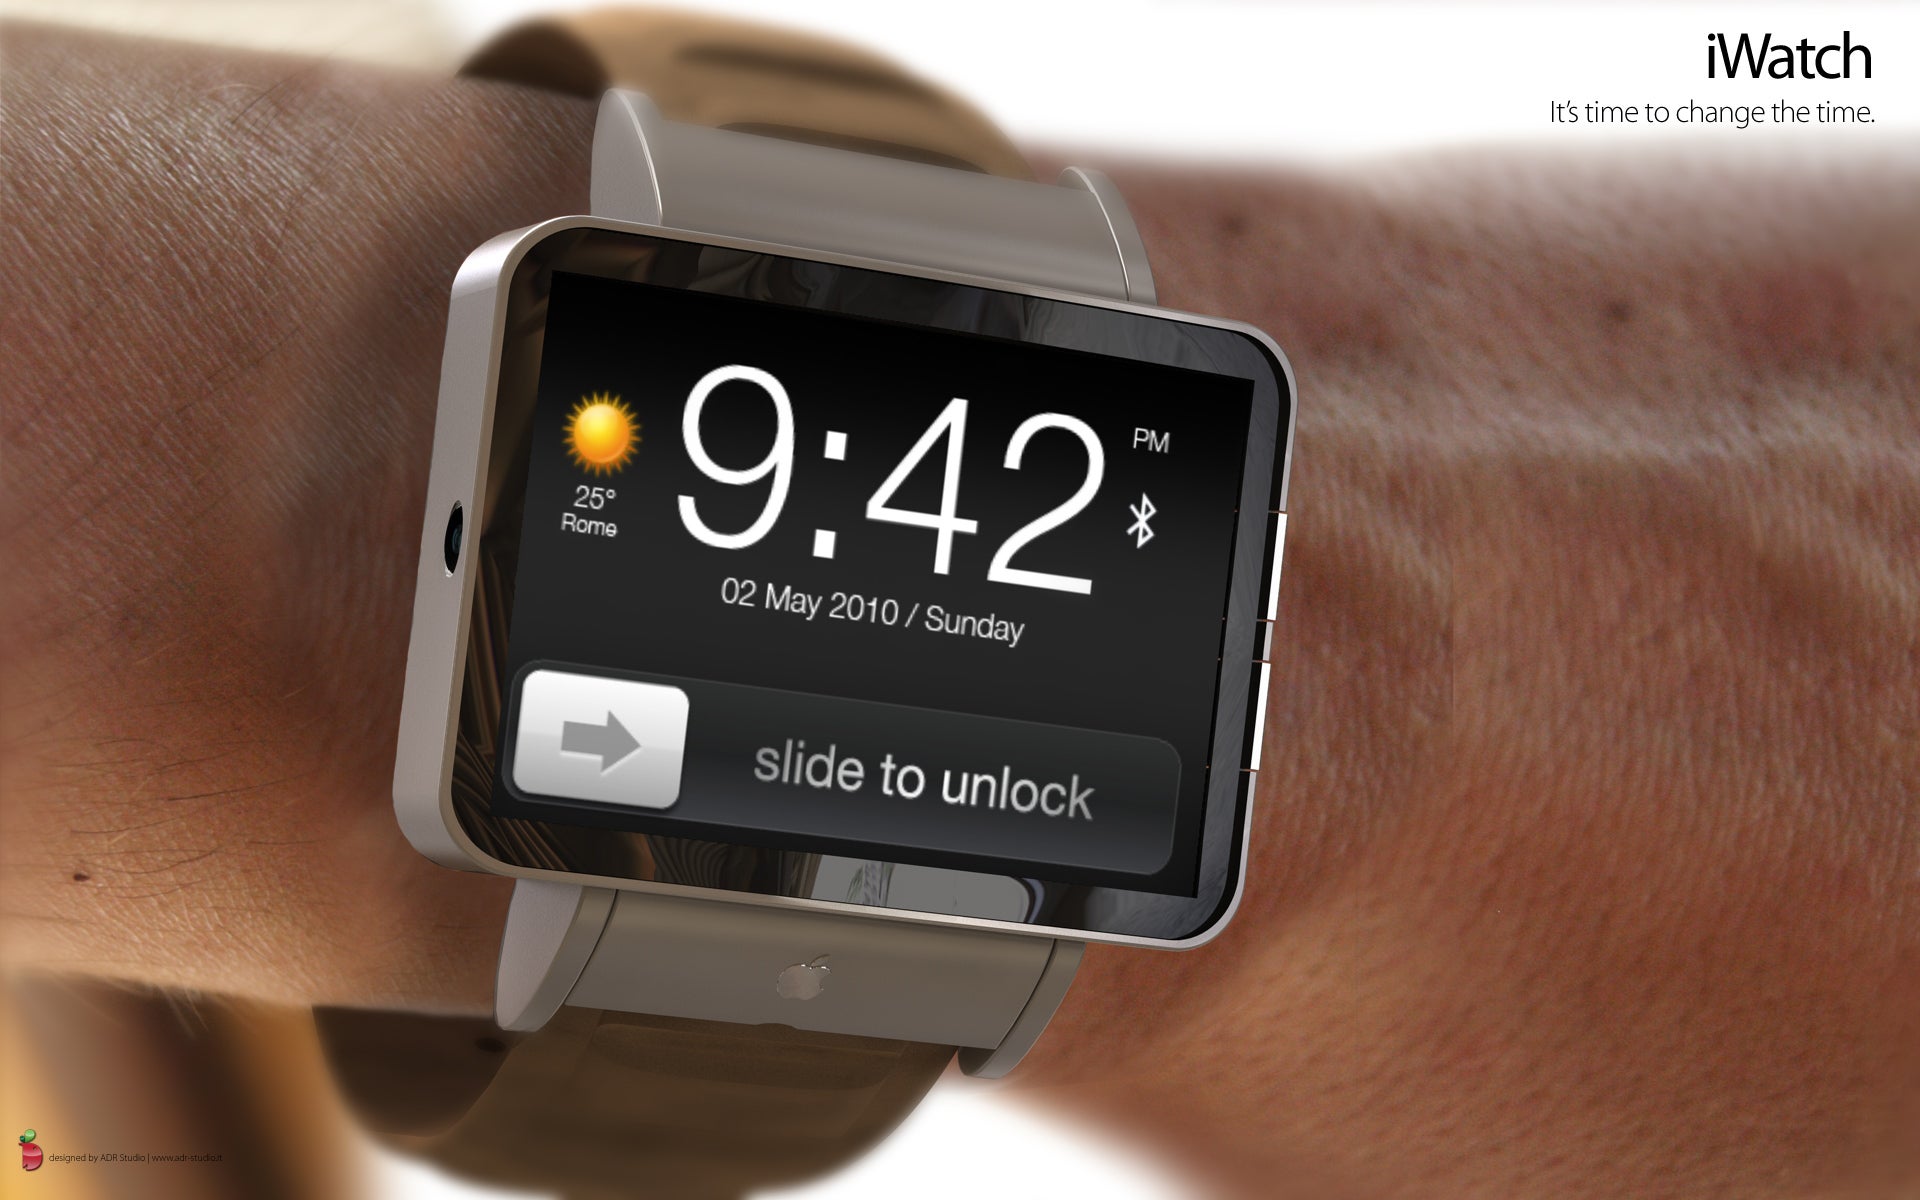 A mock-up of the iWatch